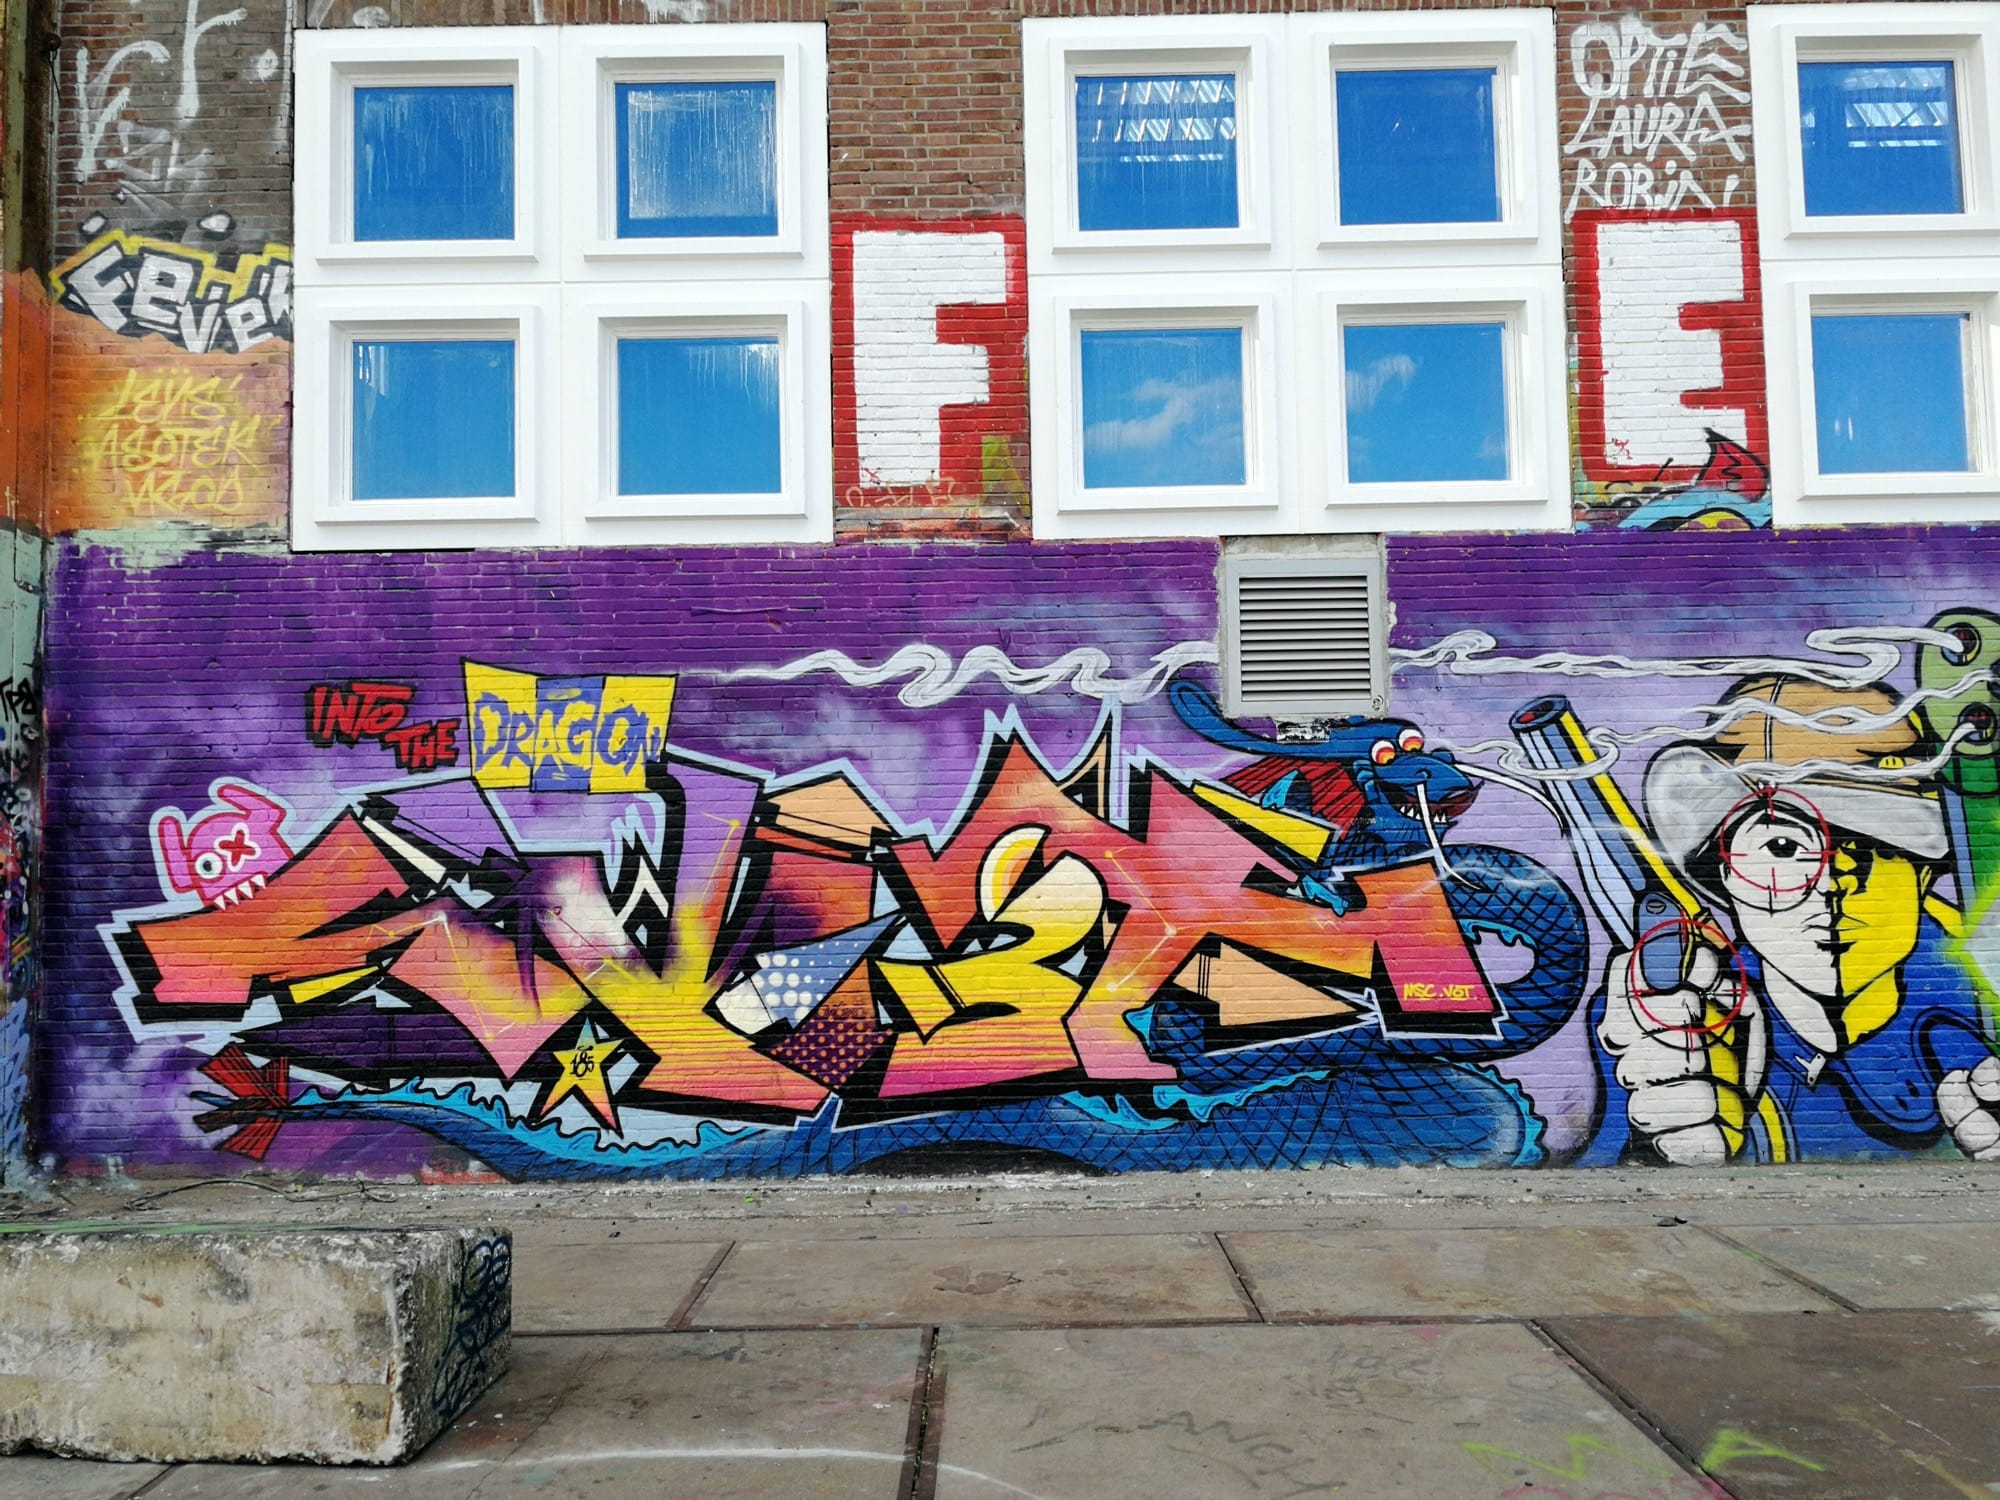 Graffiti 1716 Into the dragon captured by Rabot in Amsterdam Netherlands